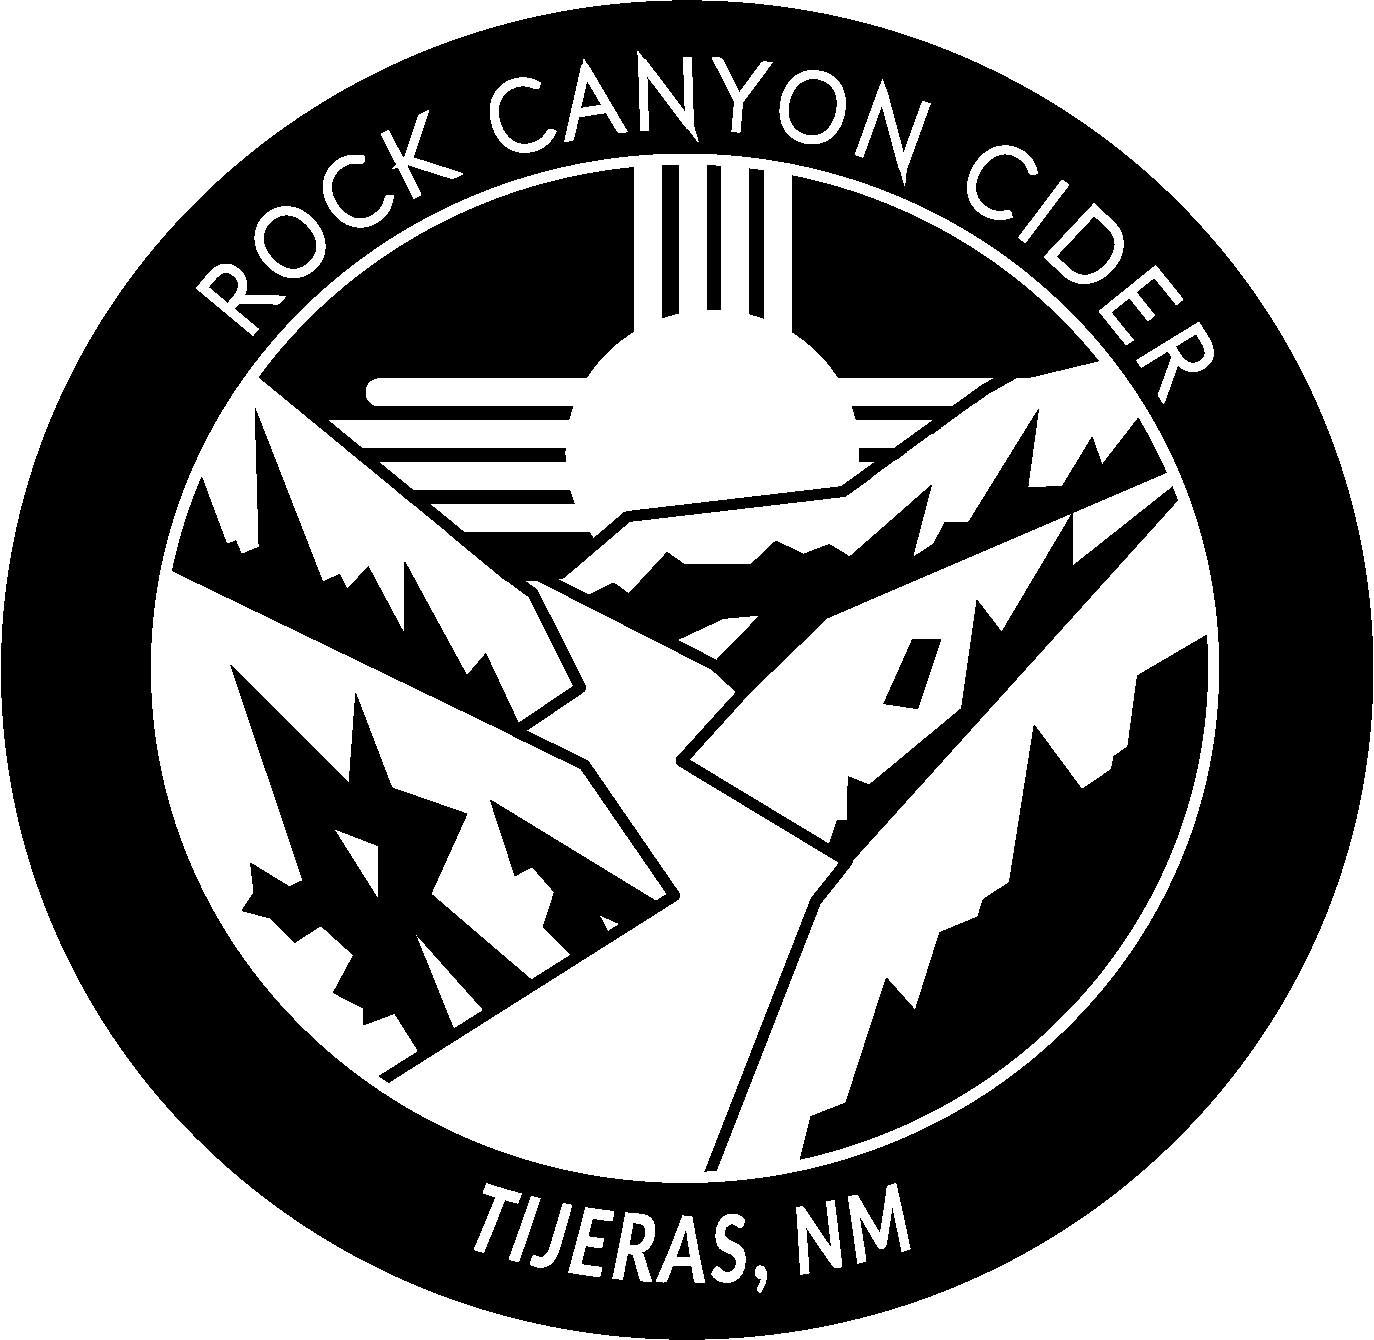 Rock Canyon Cider Home